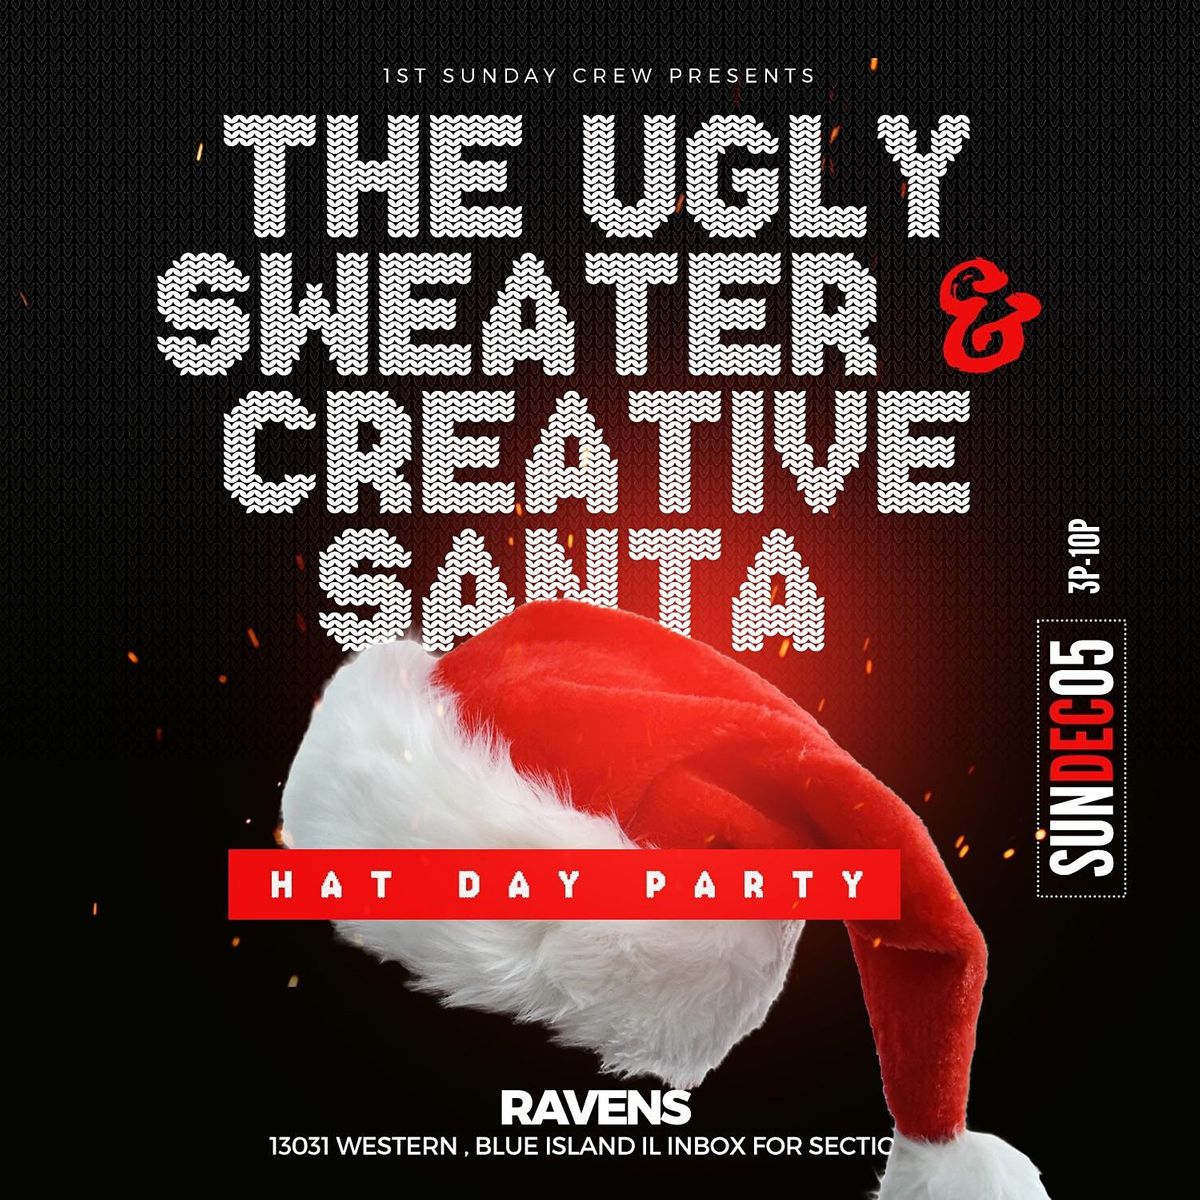 THE UGLY SWEATER & SANTA HAT DAY PARTY at RAVENS